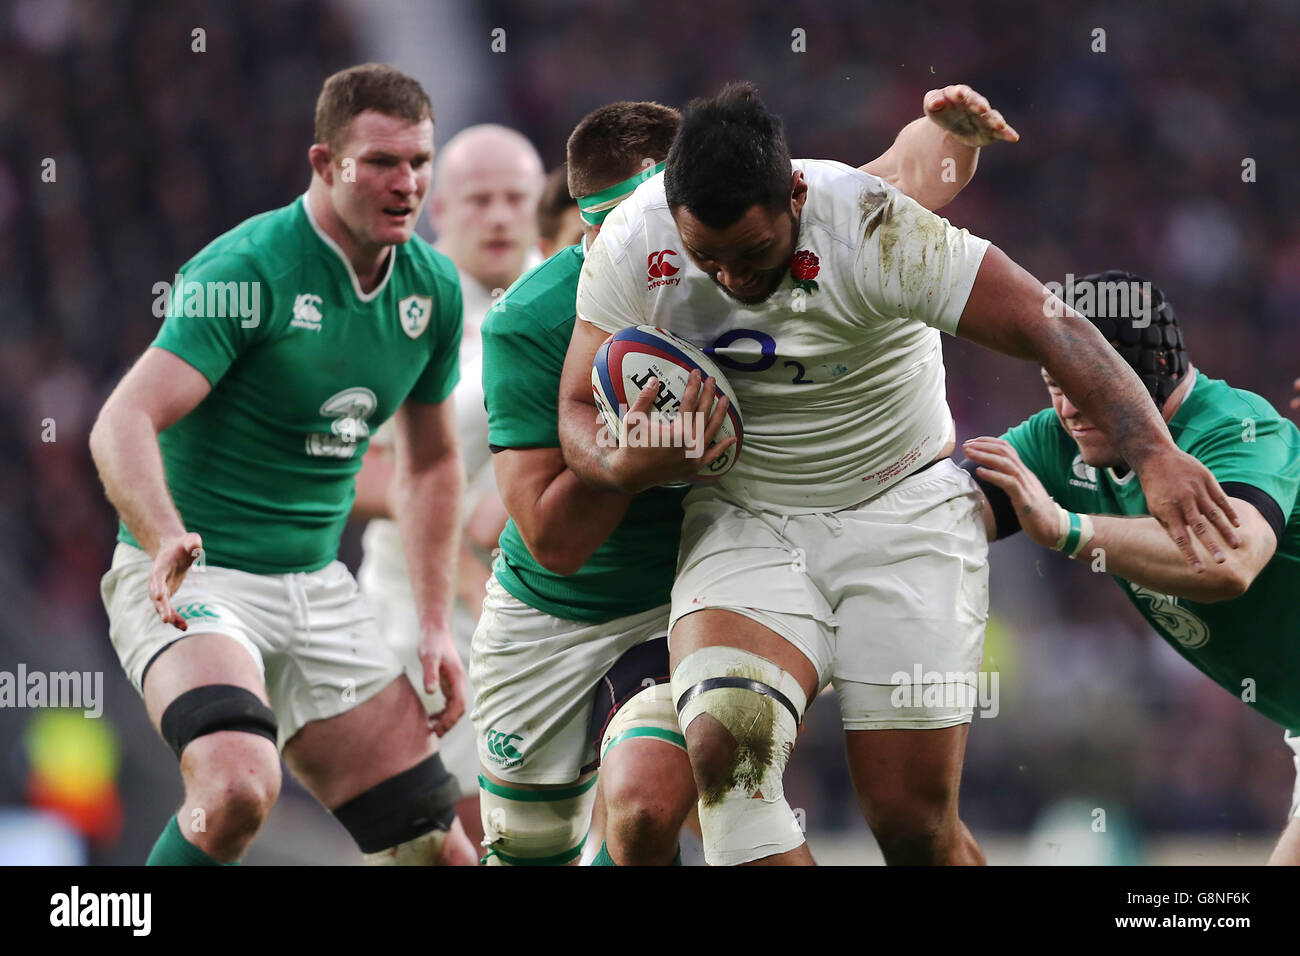 England's Mako Vunipola (centre) is tackled by Ireland's CJ Stander (left) and Mike Ross during the 2016 RBS Six Nations match at Twickenham Stadium, London. Stock Photo